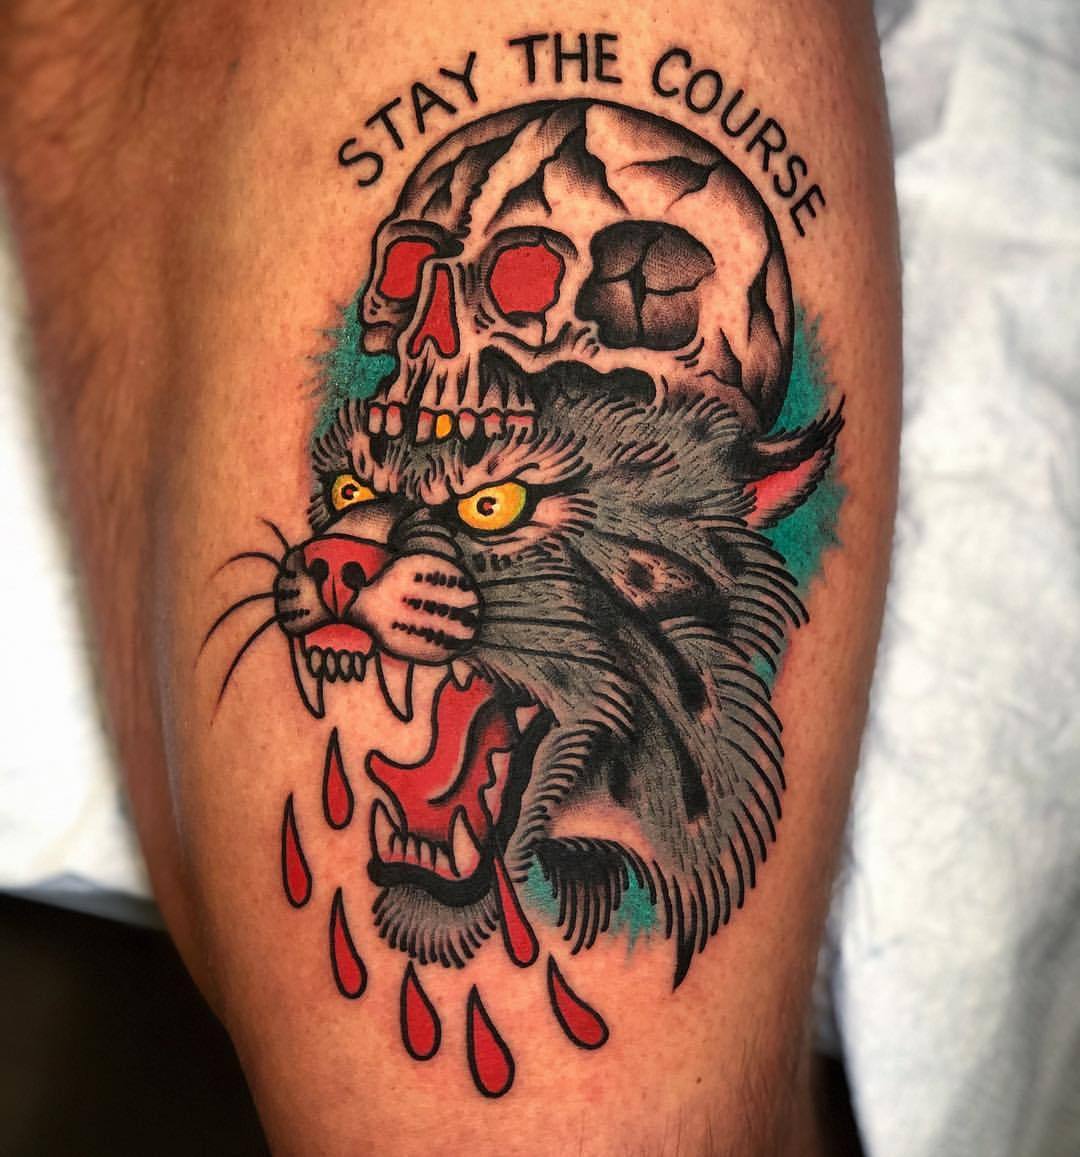 Clipper Ship  Stay the Course  Oliver Peck  Elm Street Tattoo Dallas  TX  rtattoos